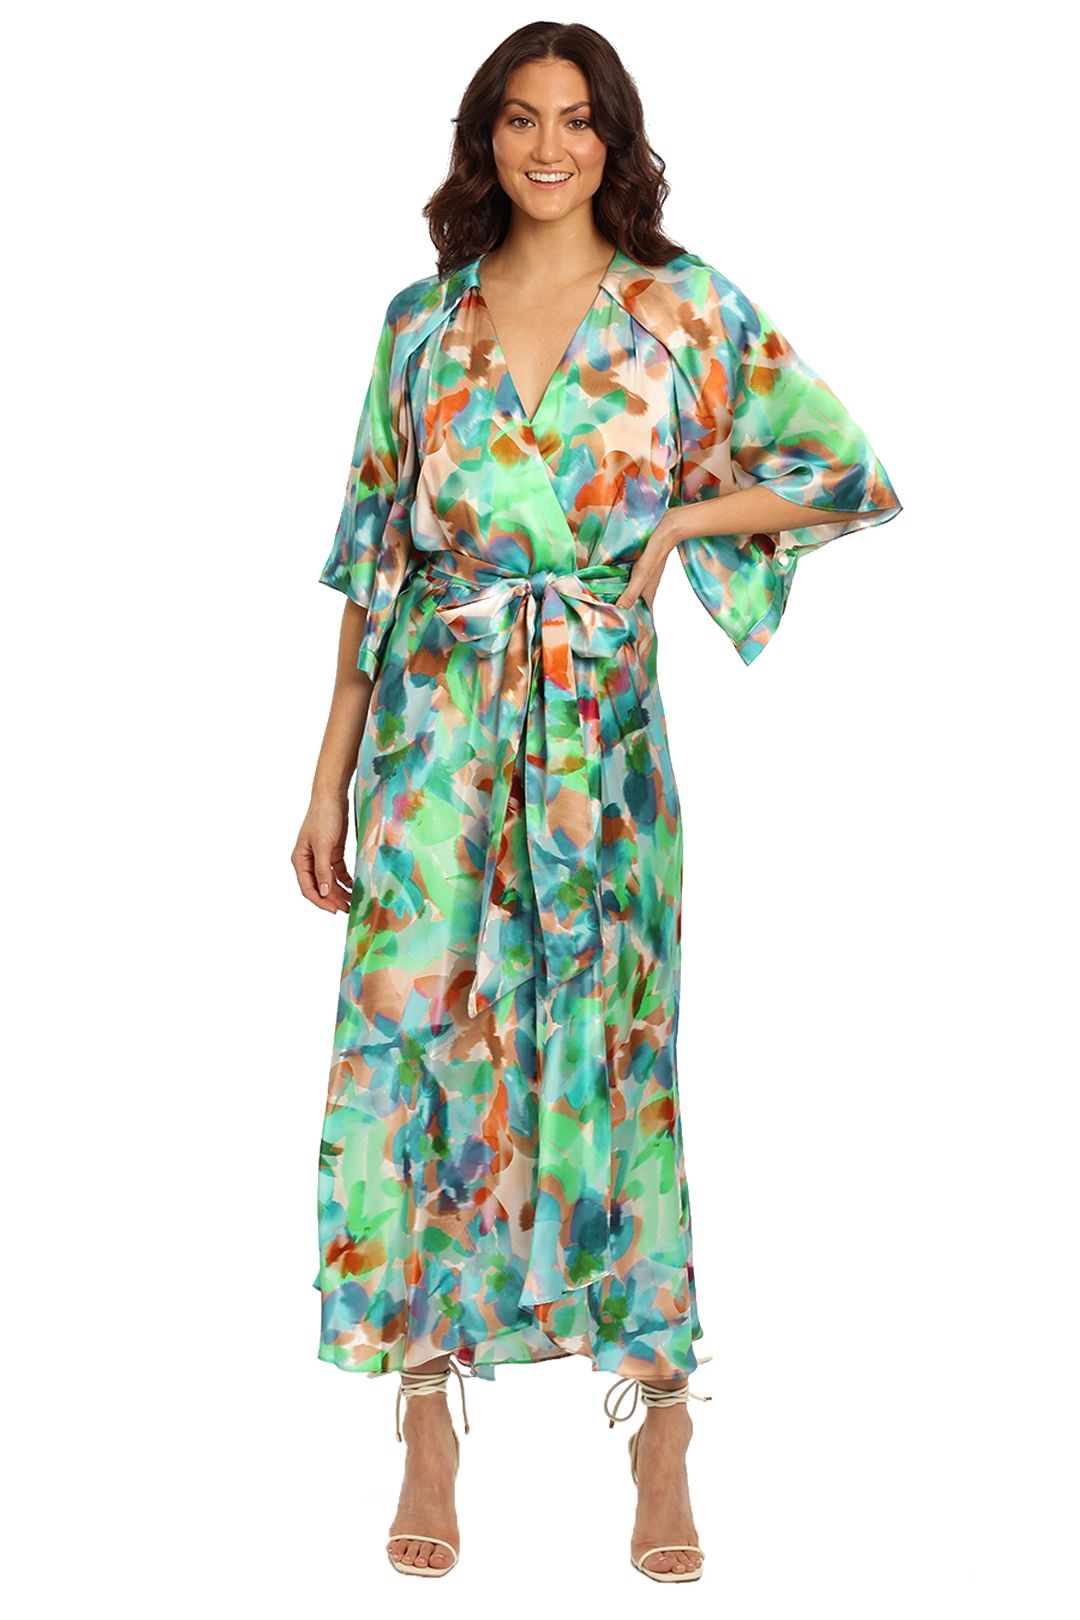 Ginger and Smart Beautiful Truth Wrap Dress floral